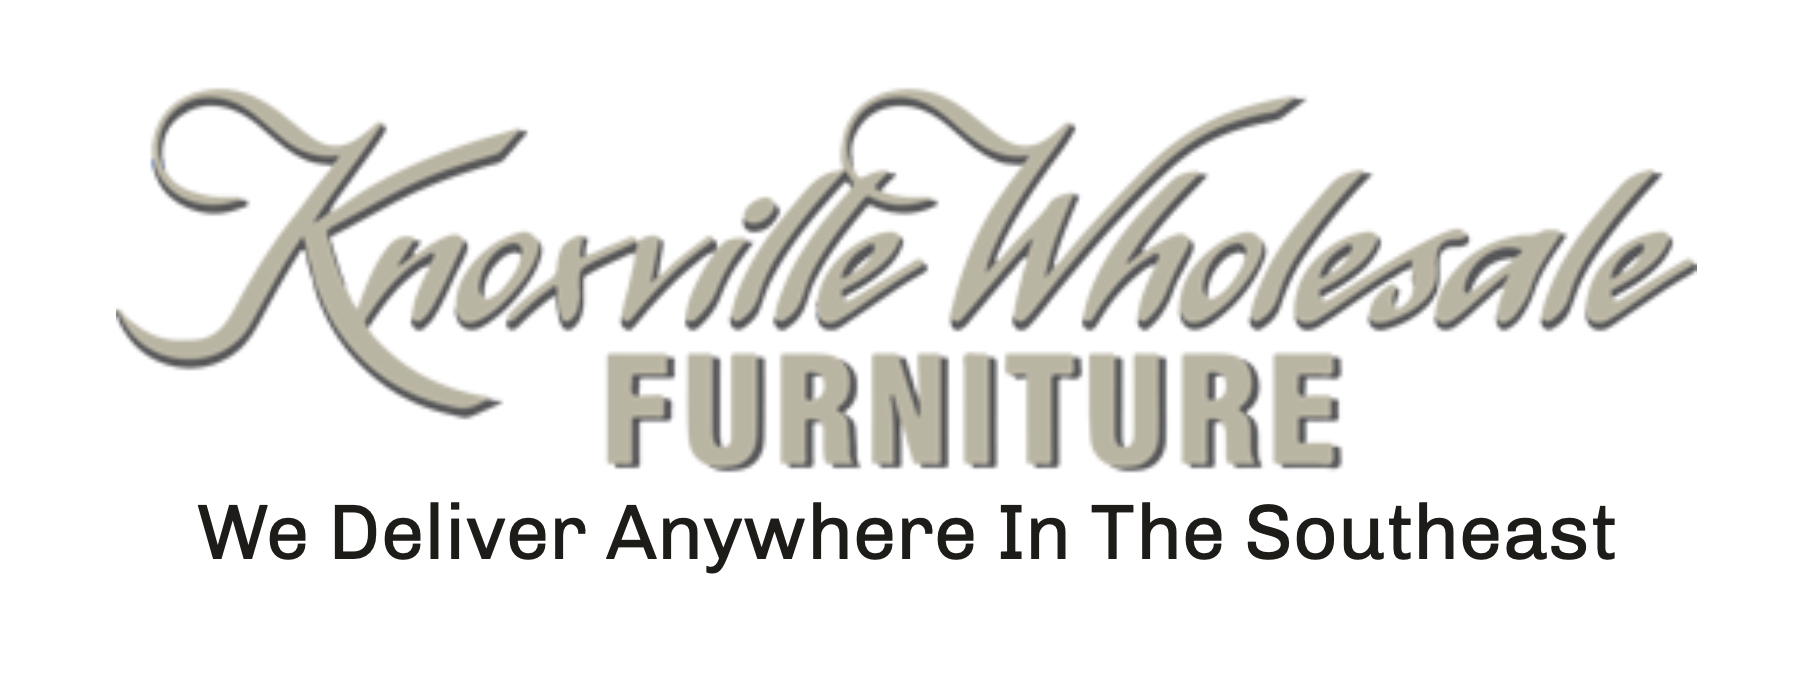 Knoxville_wholesale_furniture